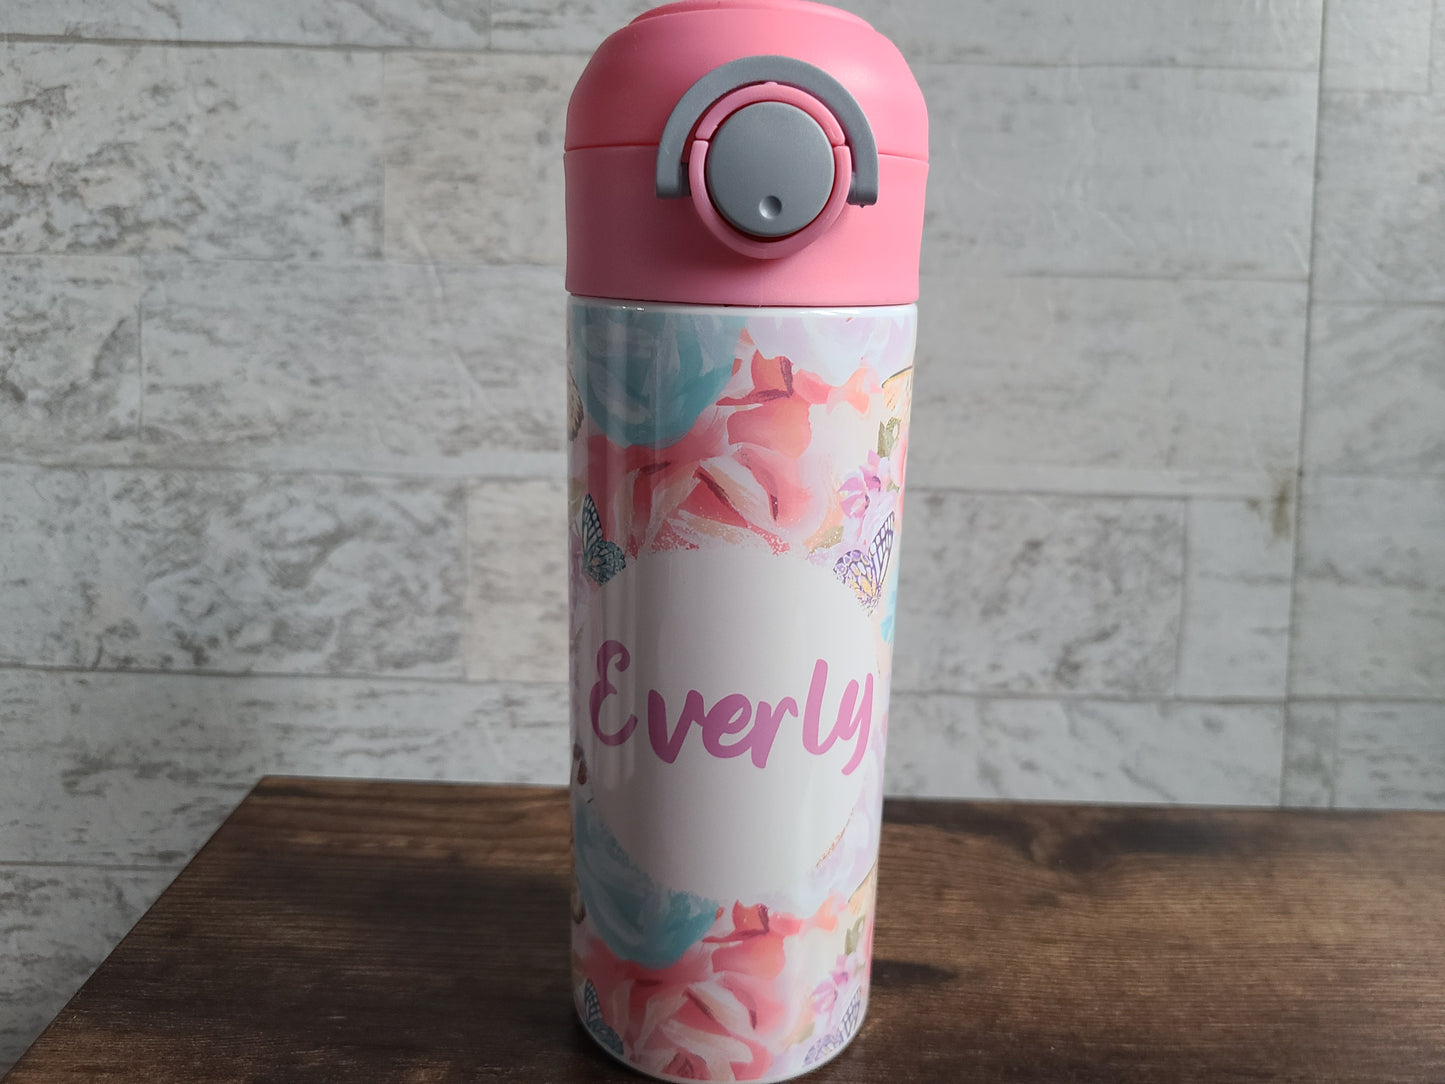 Butterfly and Flowers Flip Top Water Bottle - Personalized